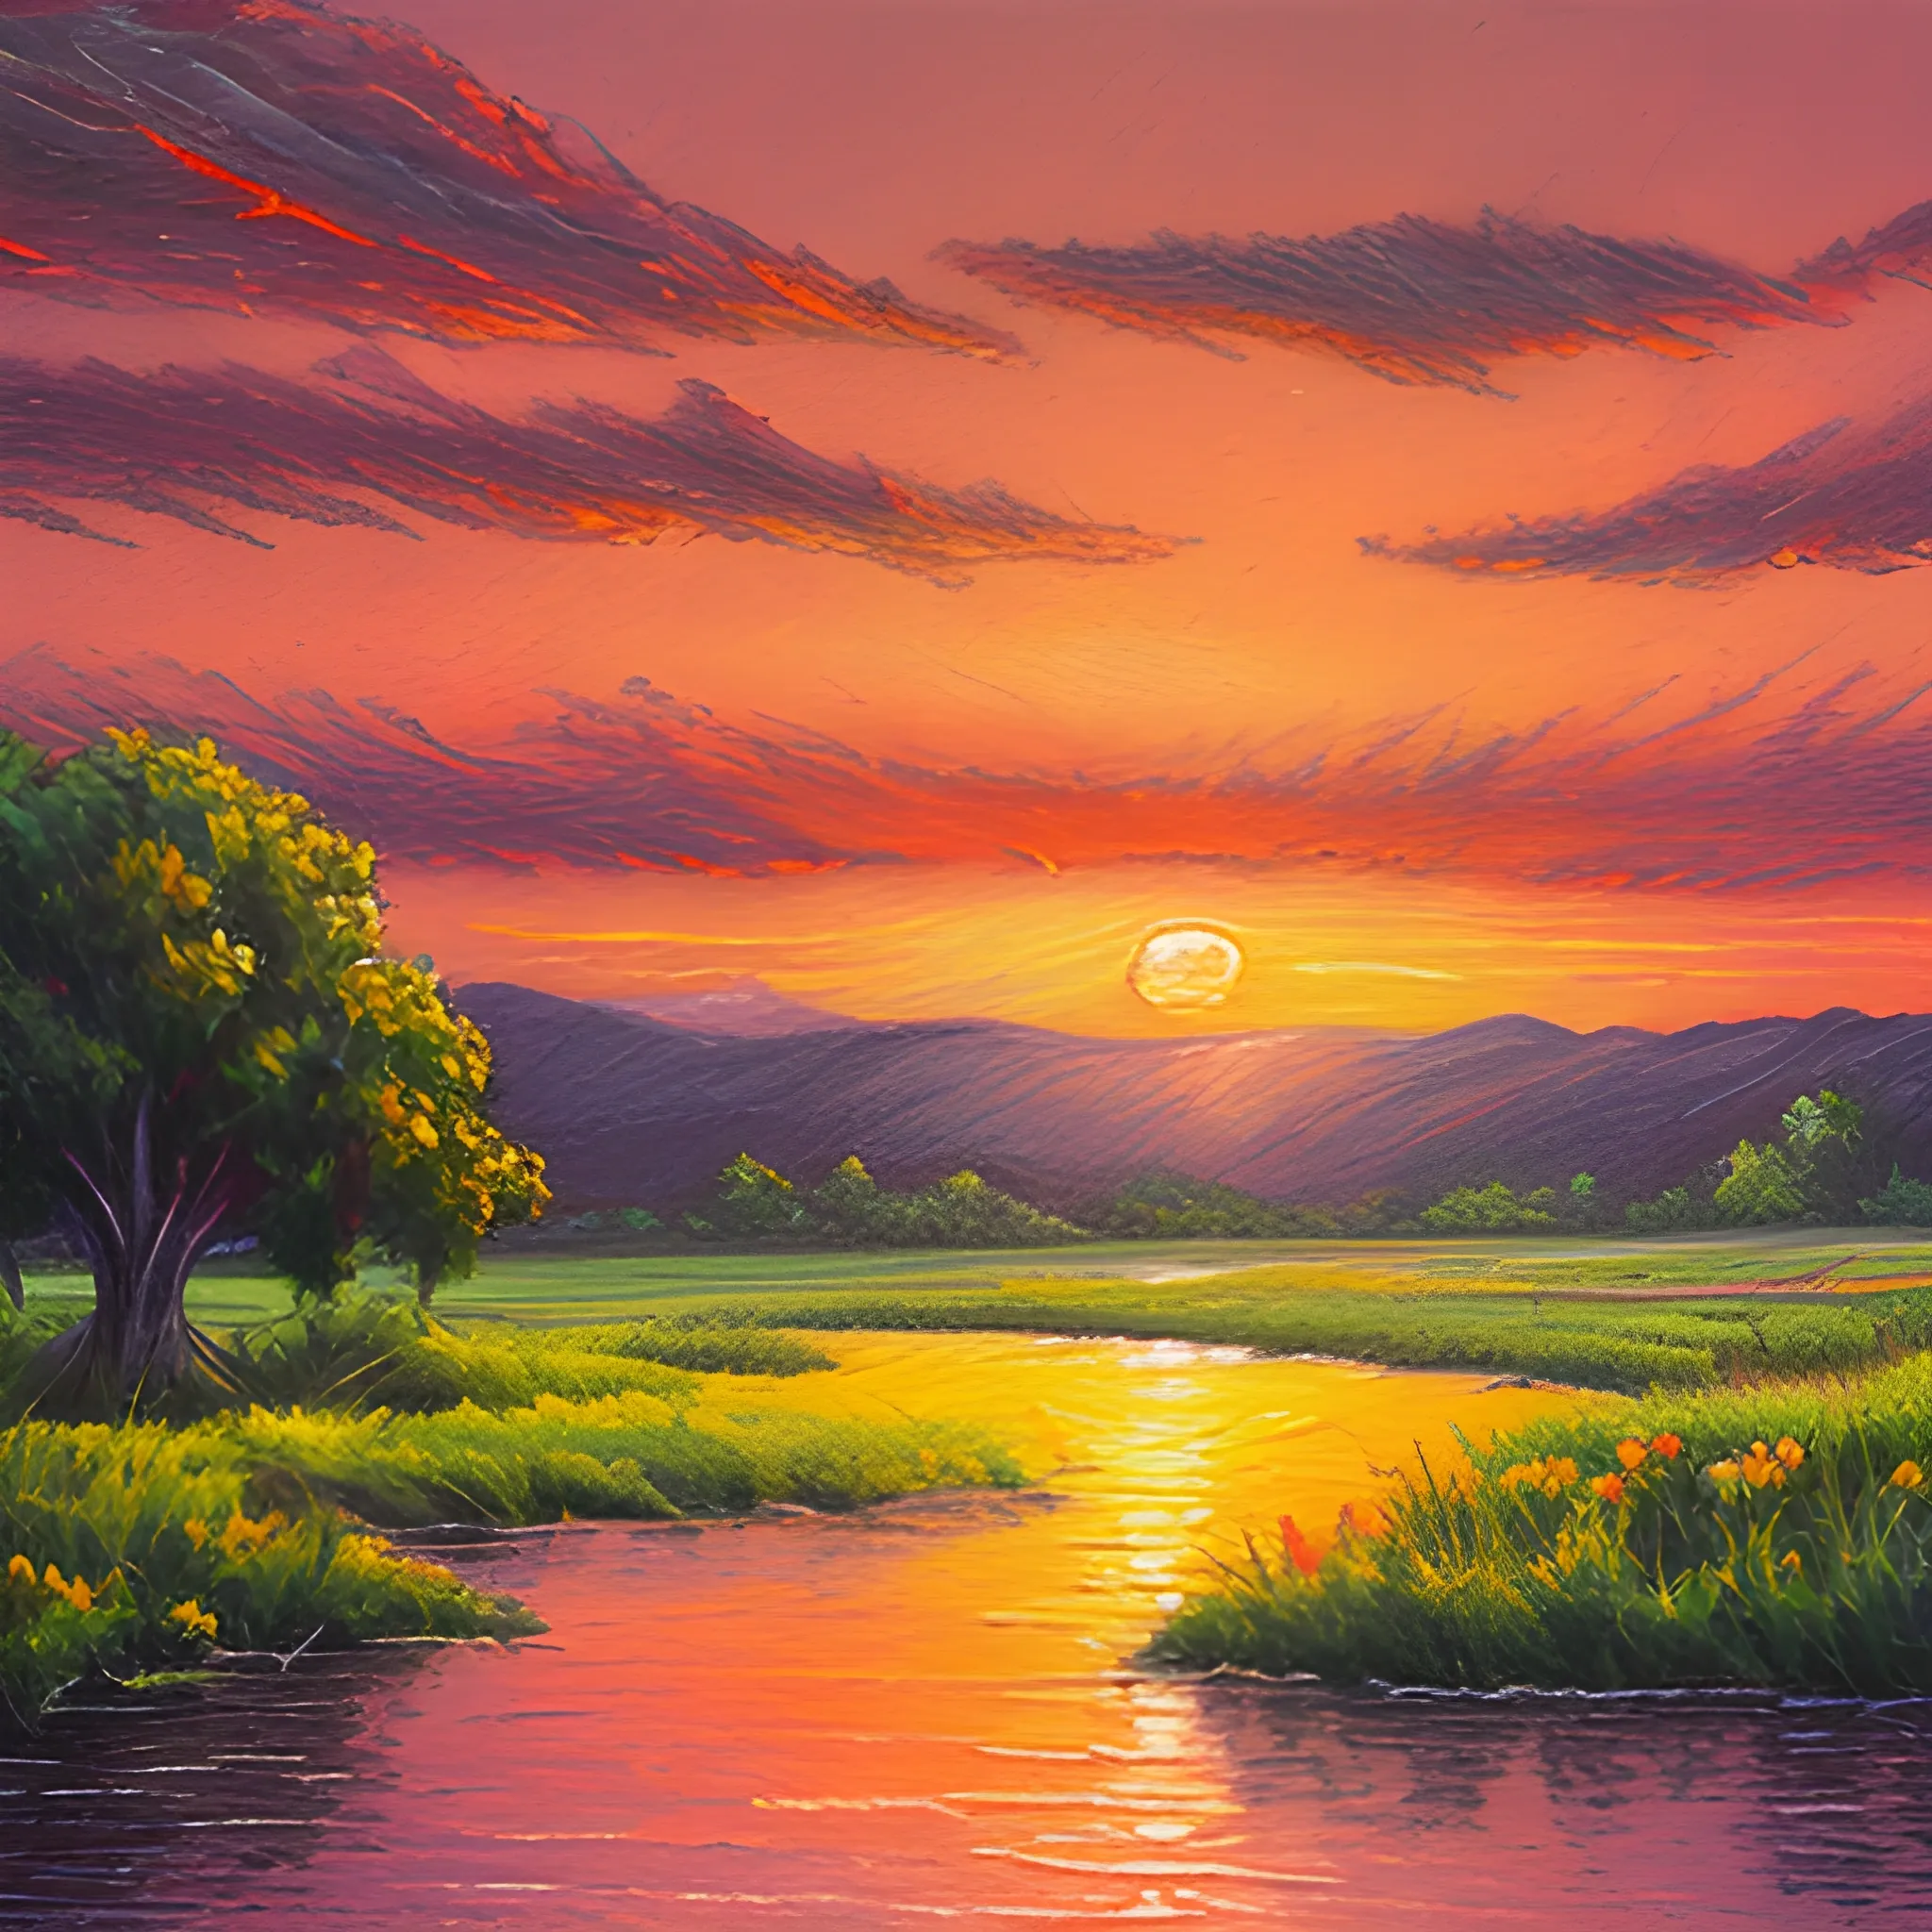 Sunset landscape painting, oil painting style, Pencil Sketch